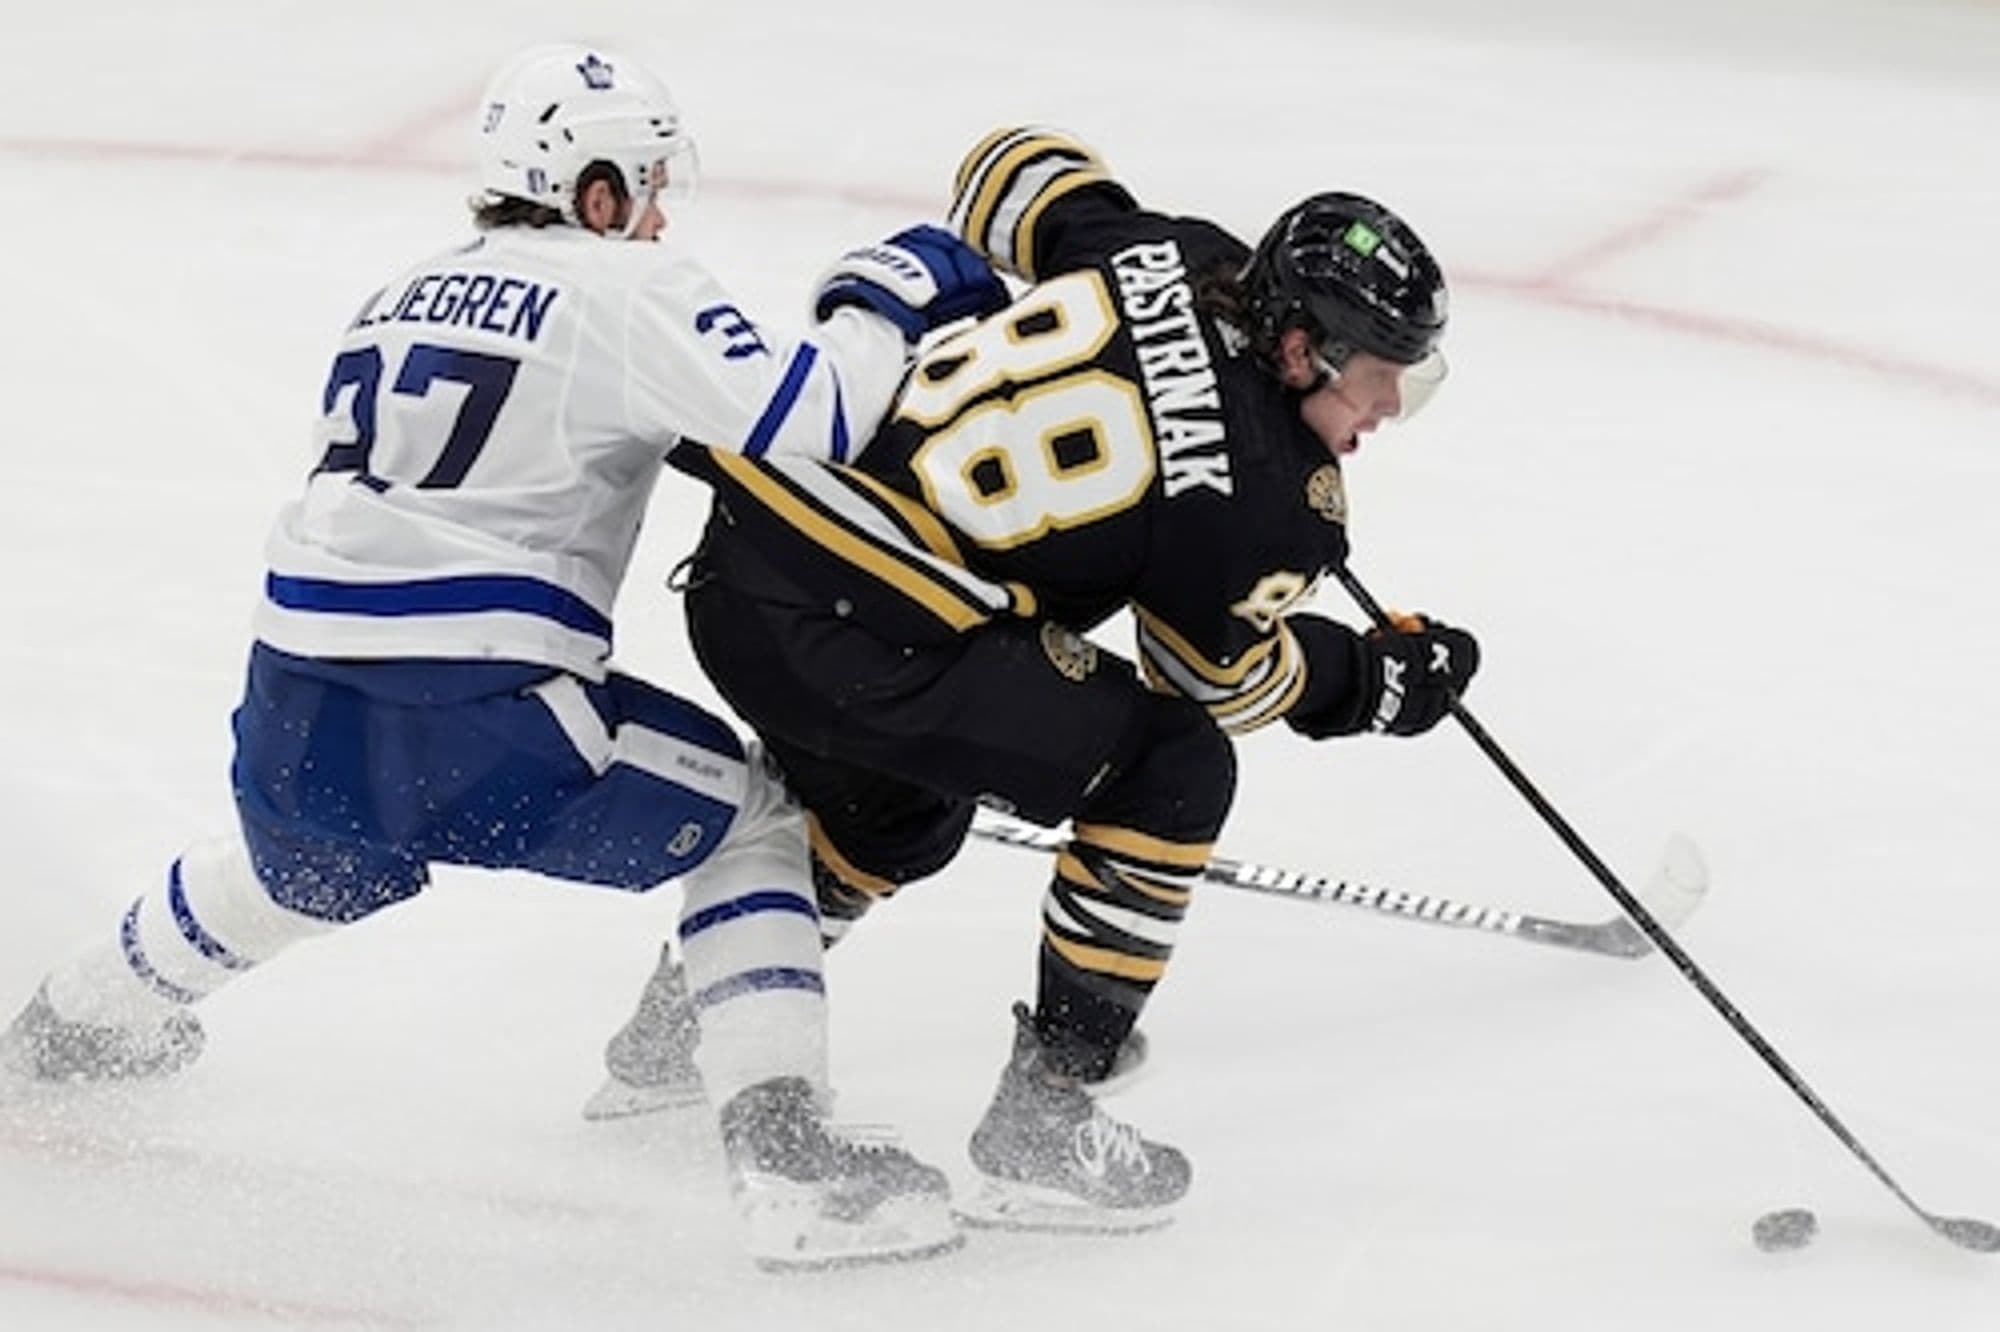 # Title: Marchand Leads Bruins to Victory Over Maple Leafs in Game 3 Showdown